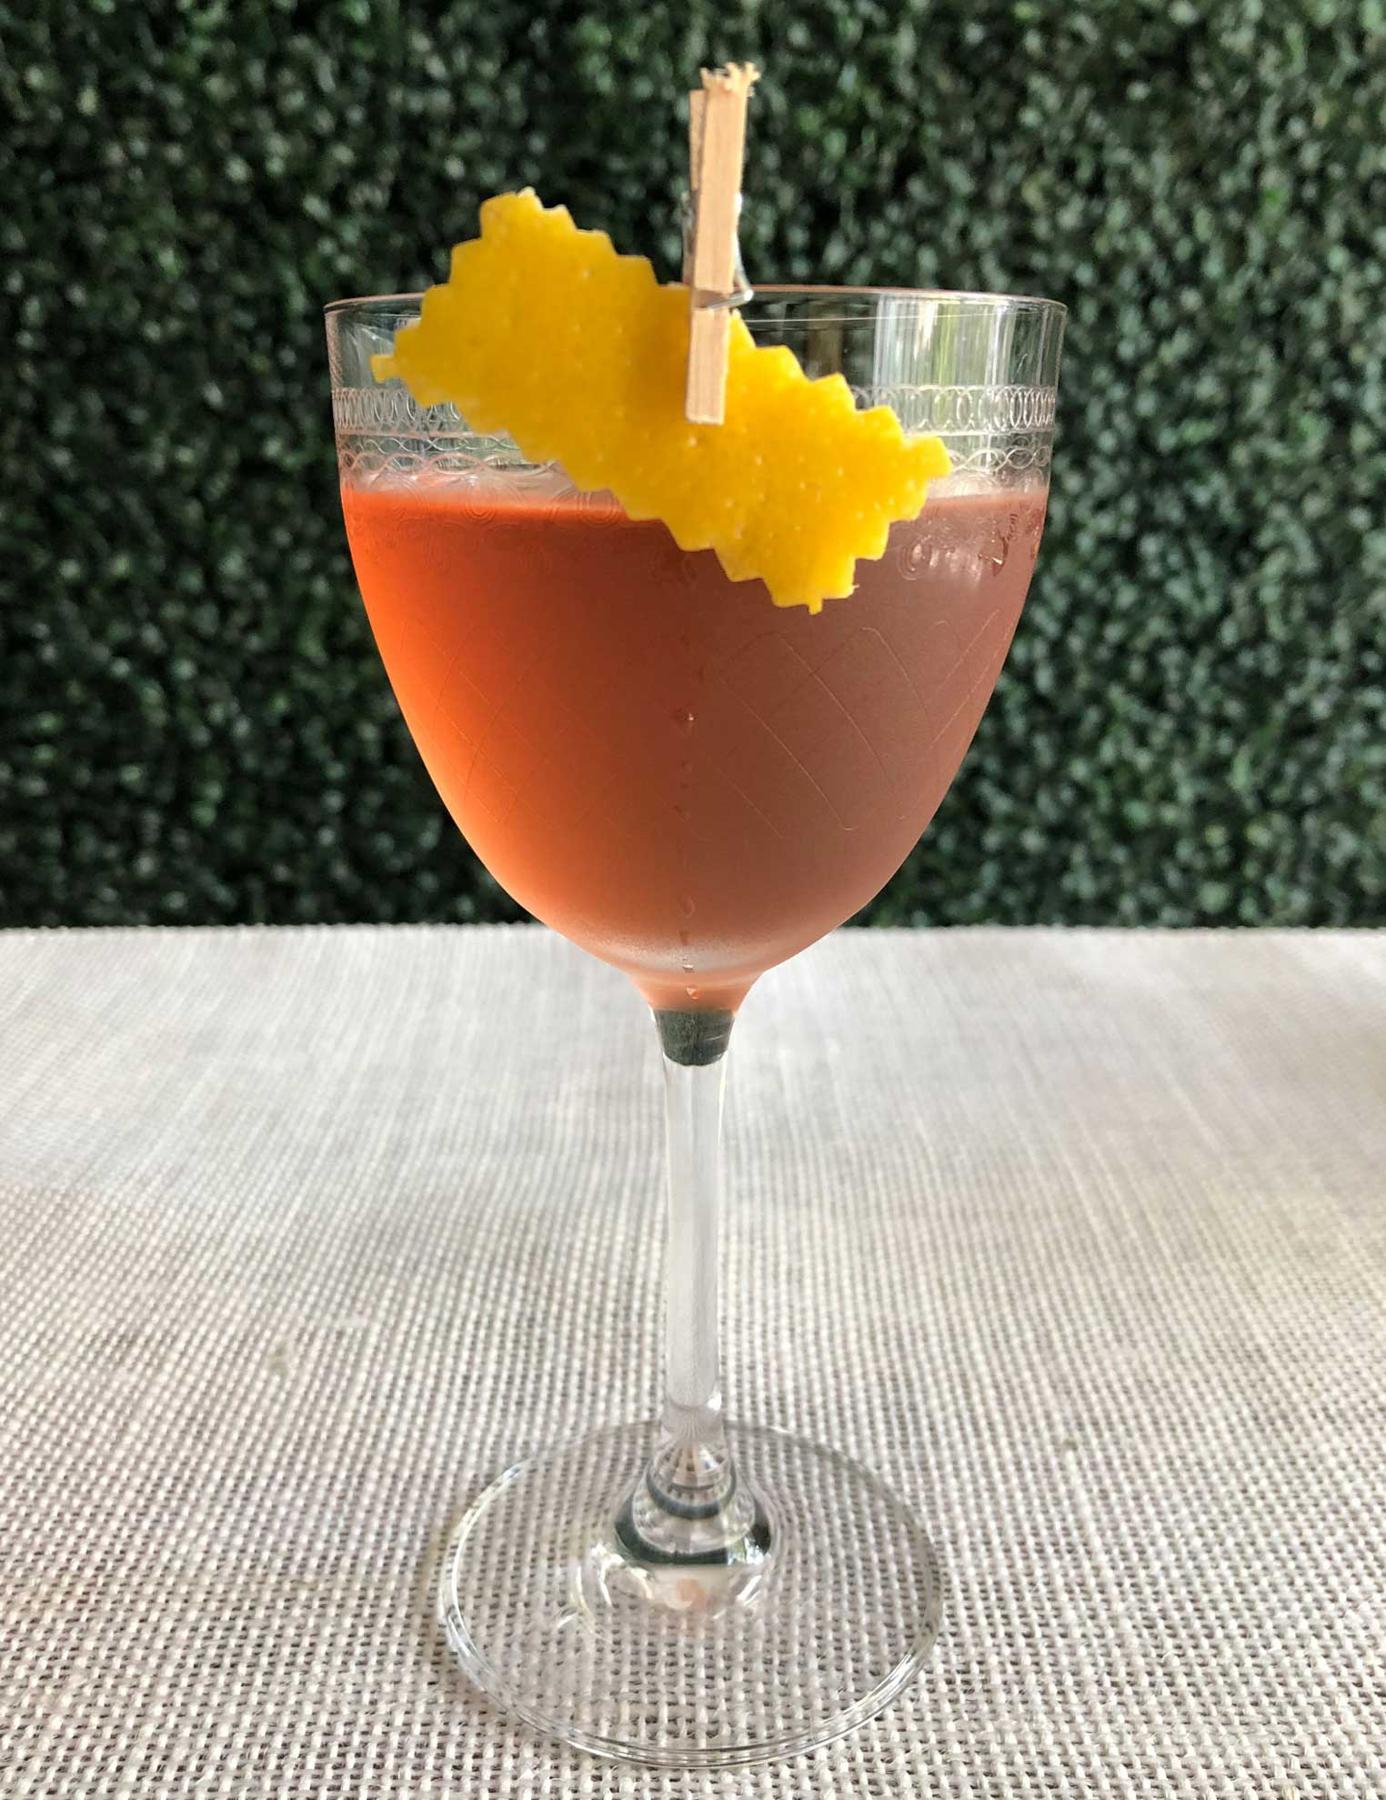 An example of the Dark Side of the Cool, the mixed drink (drink) featuring Comoz Blanc Vermouth de Chambèry, Blume Marillen Apricot Eau-de-Vie, Angostura bitters, and lemon twist; photo by Lee Edwards